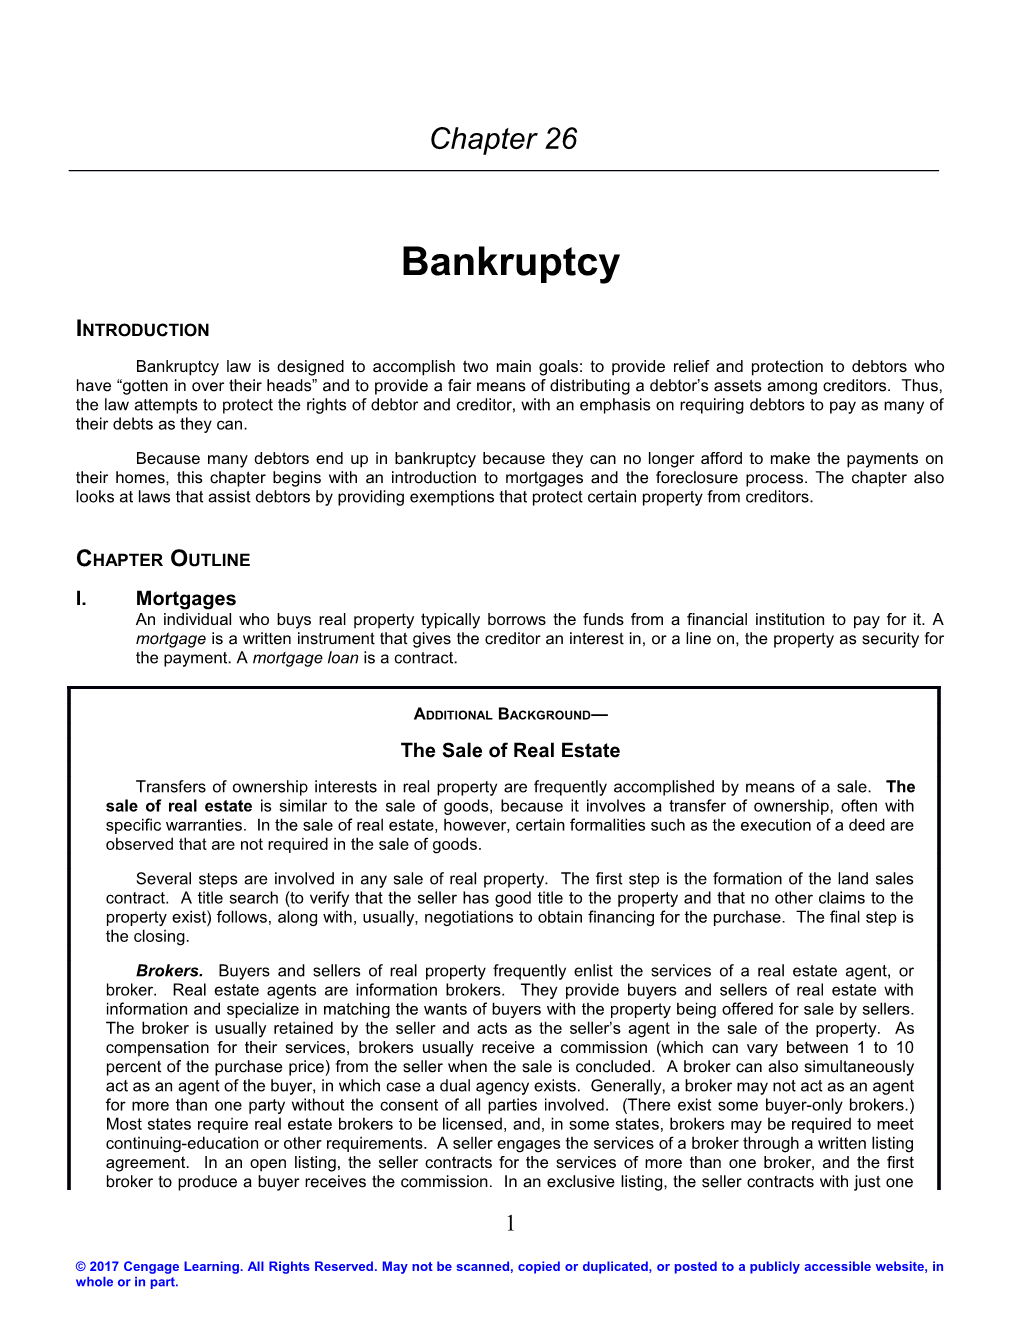 Chapter 26: Bankruptcy 1